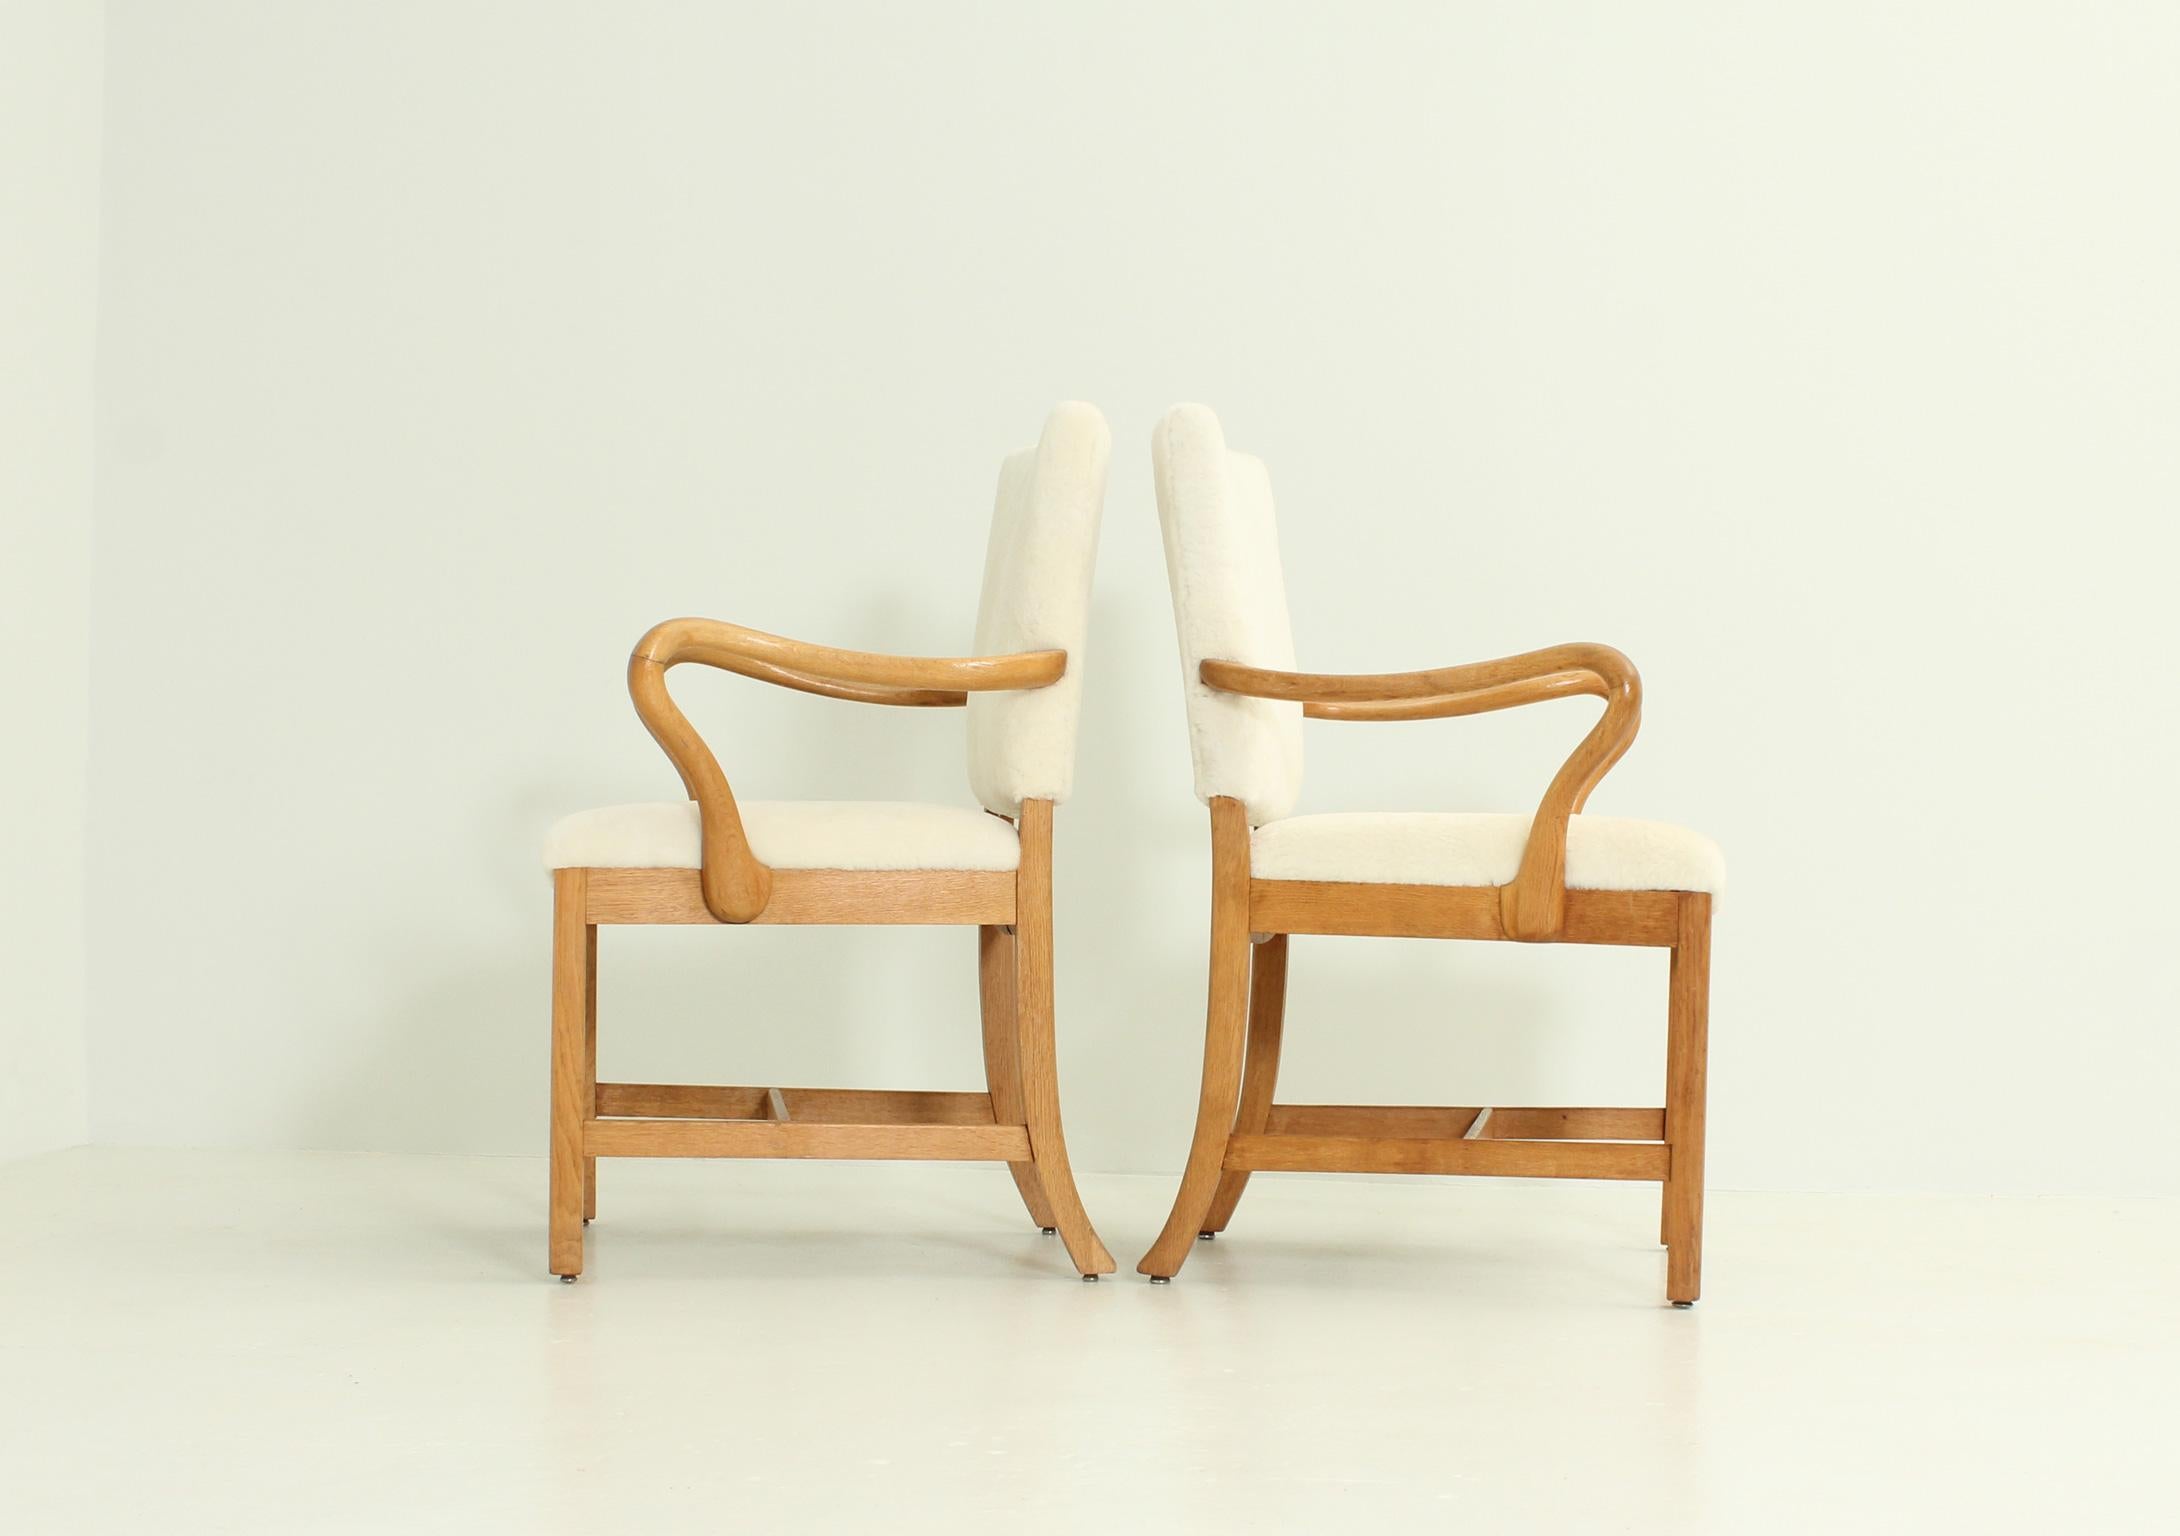 Carved Pair of Armchairs by Jacob Kjaer, Denmark, 1930's